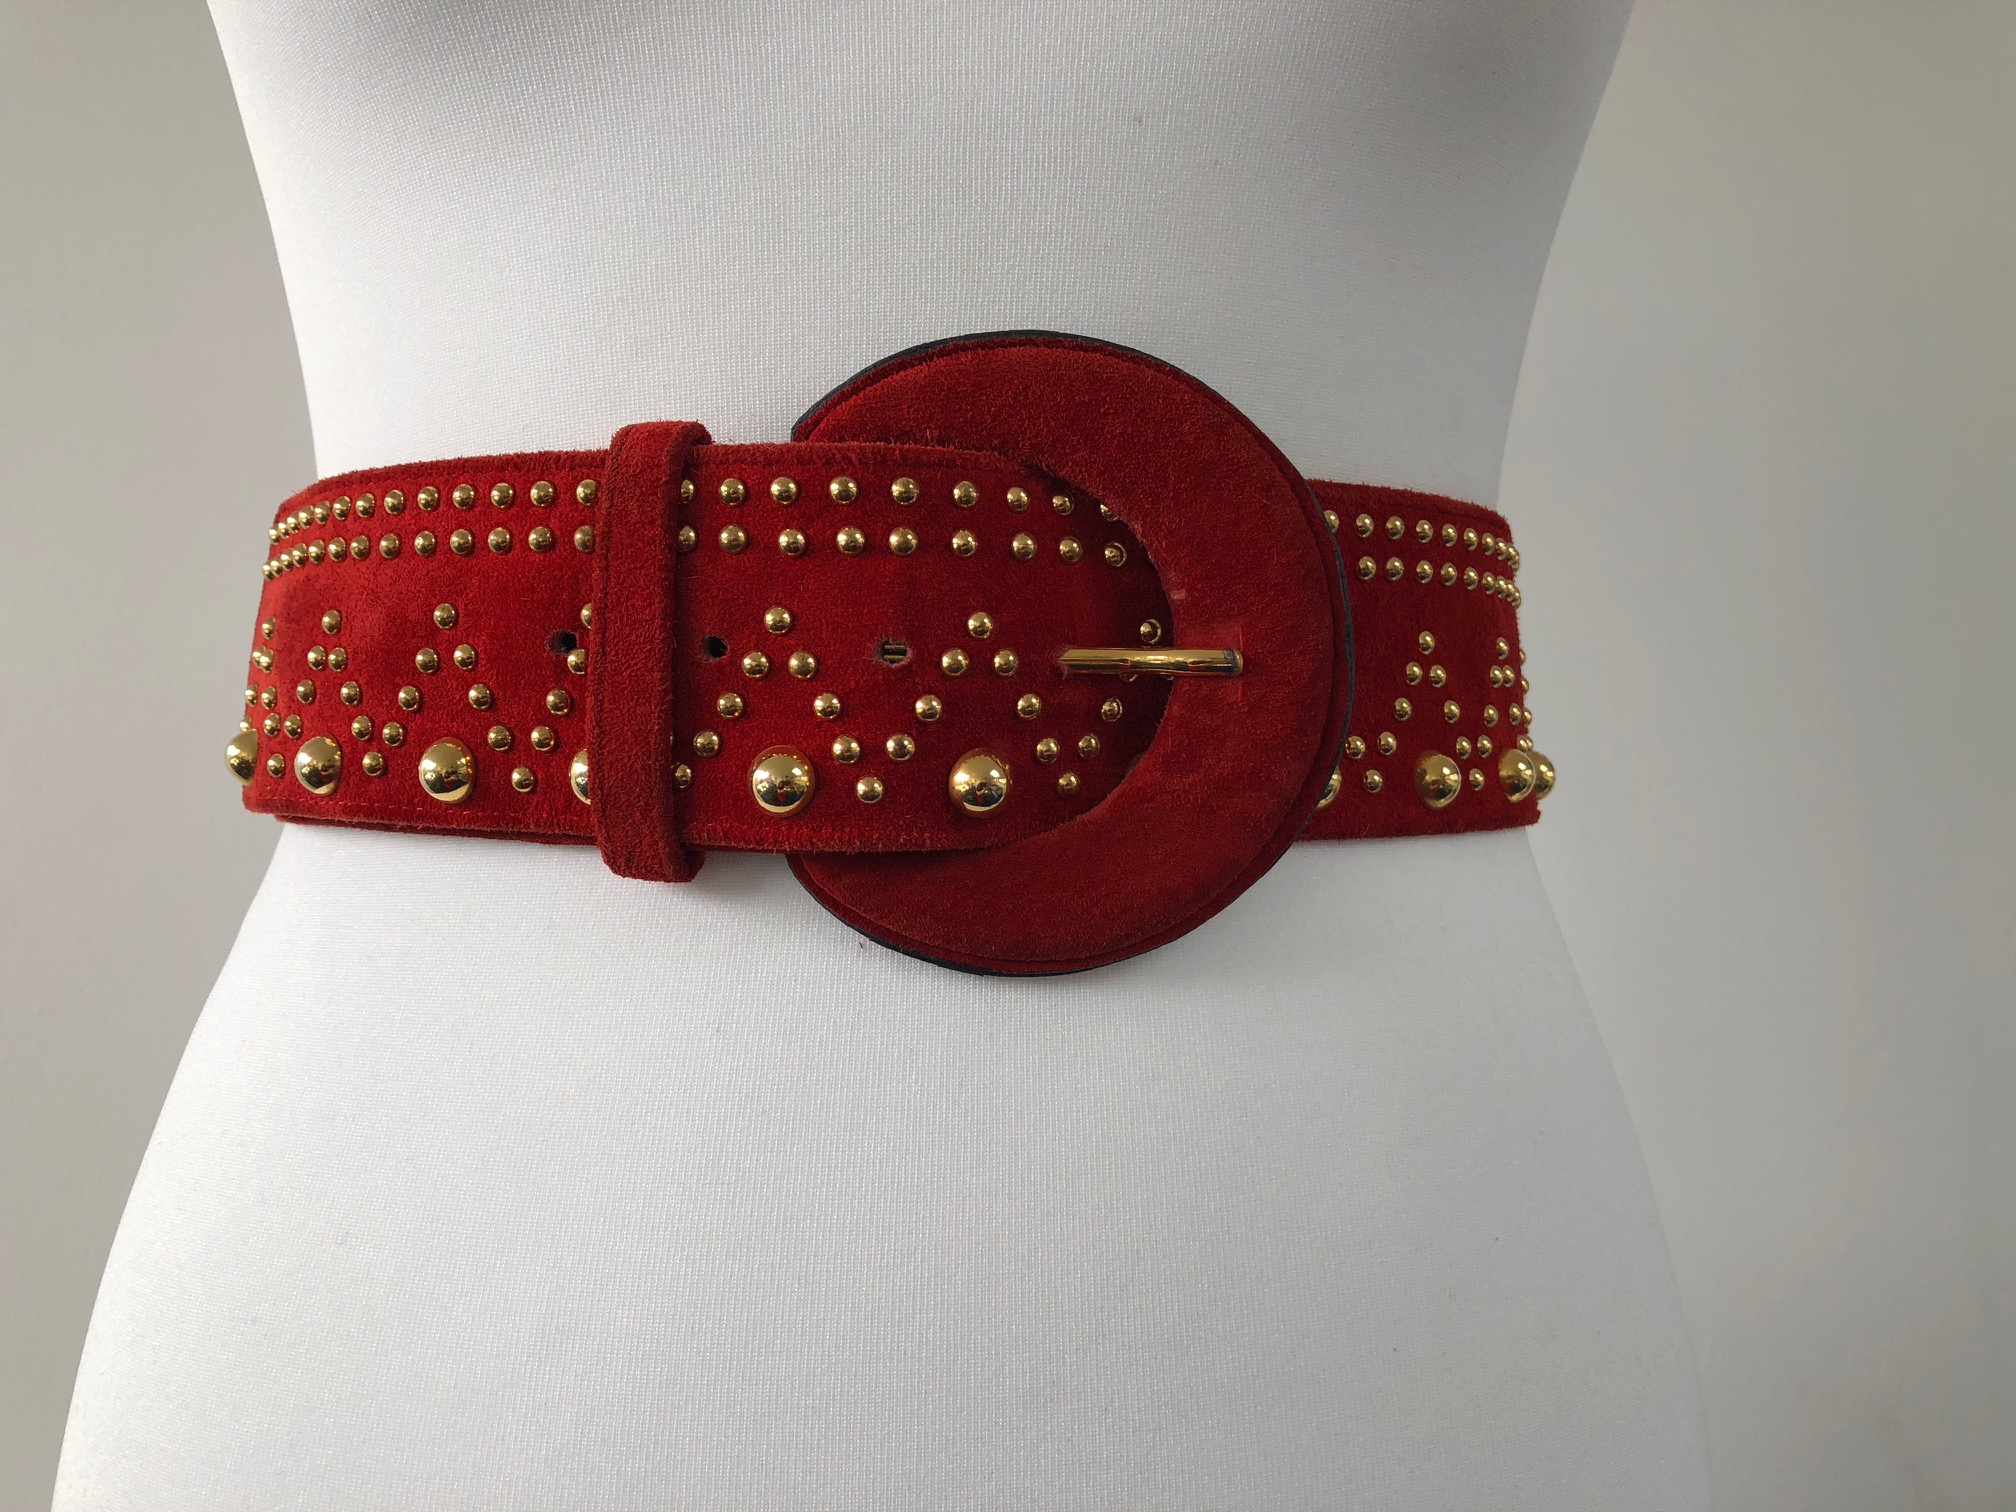 1980s YSL Yves Saint Laurent Red Suede Gold Buckle Belt with Charm – style  - CHNGR